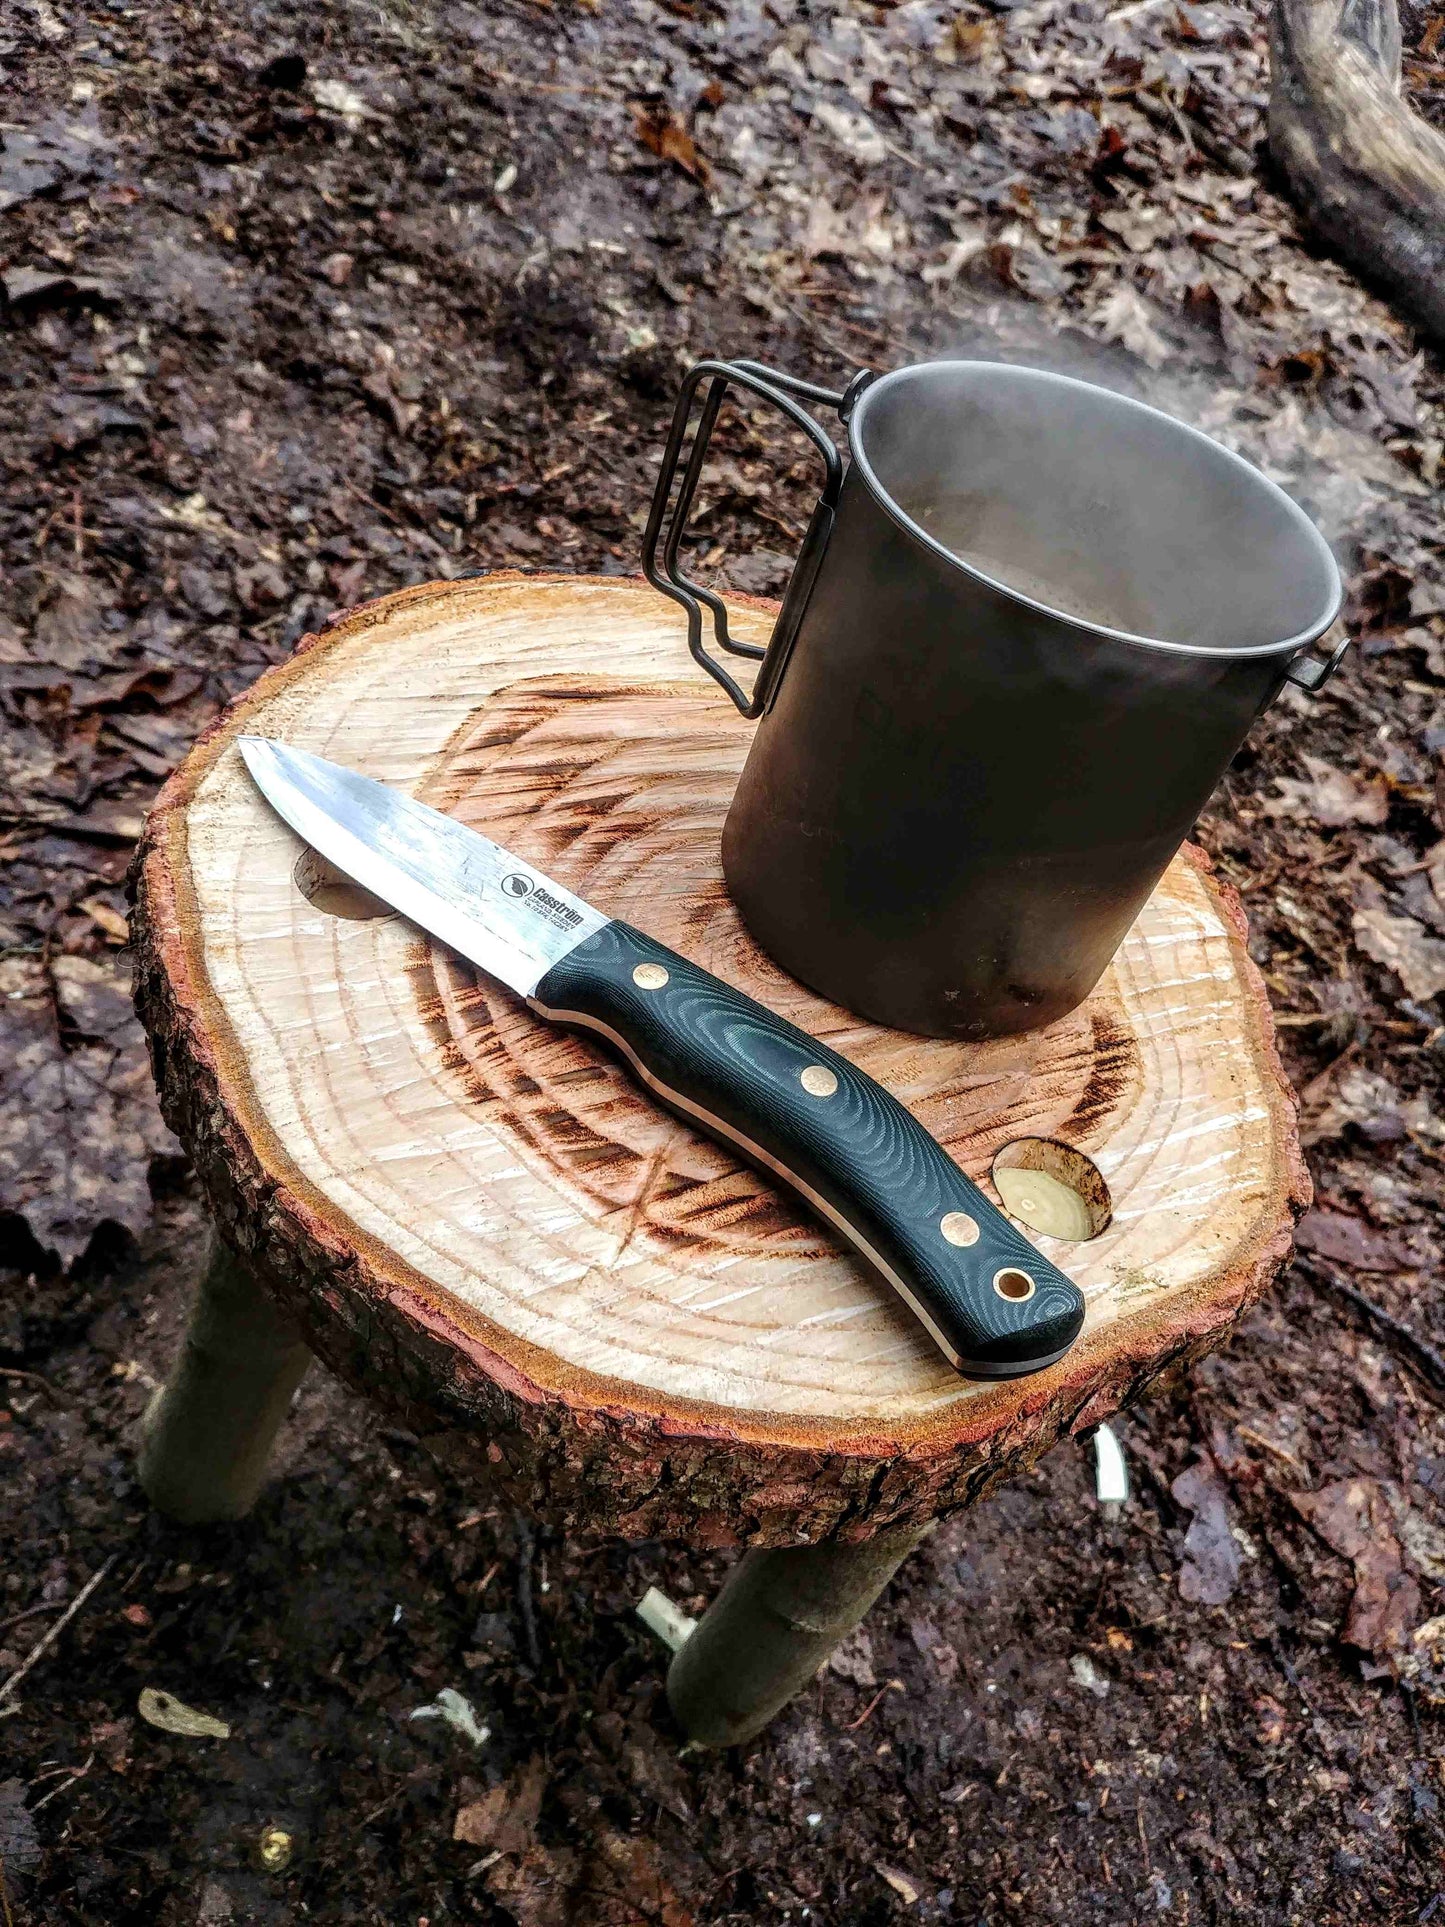 Casstrom No.10 green micarta handle on a wooden stool with a mig of coffee